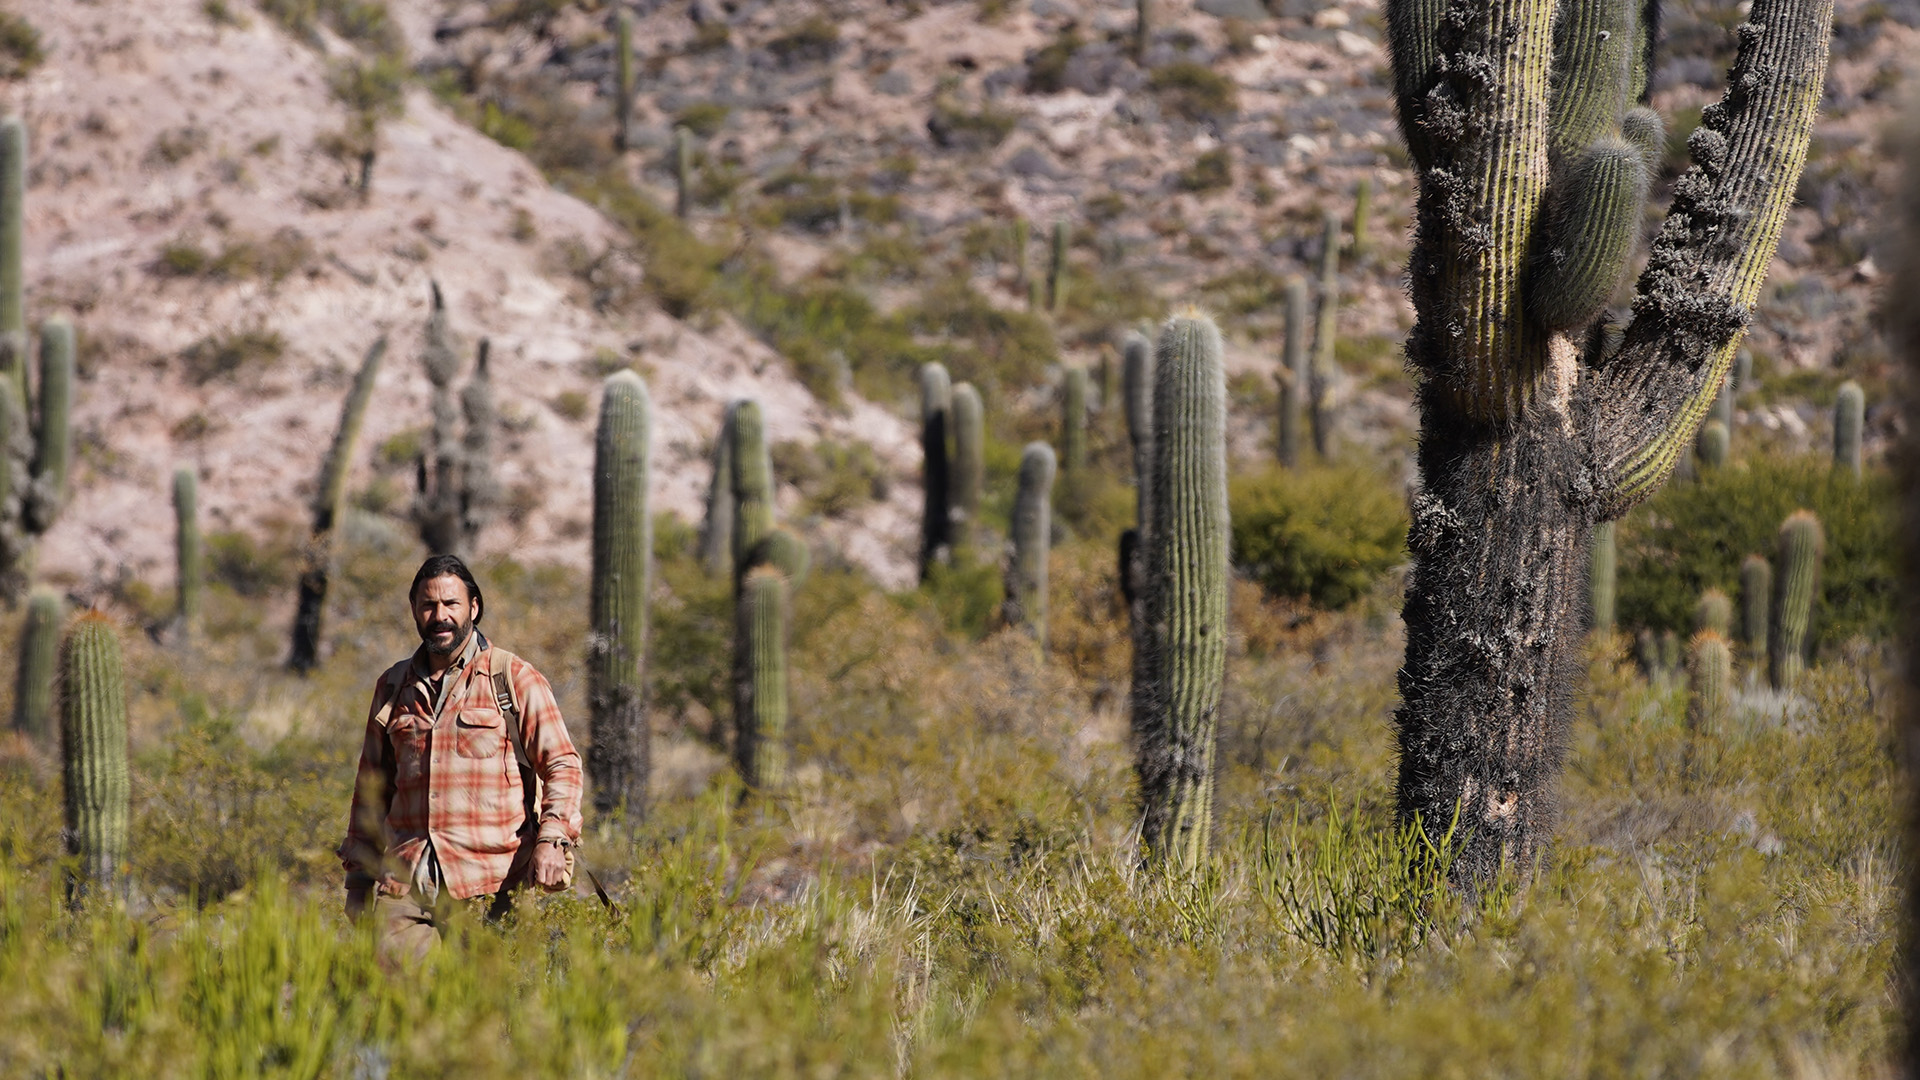 Hazen walking in the desert among the cacti. This is from Primal Survivor: Over the Andes. [Photo of the day - February 2023]